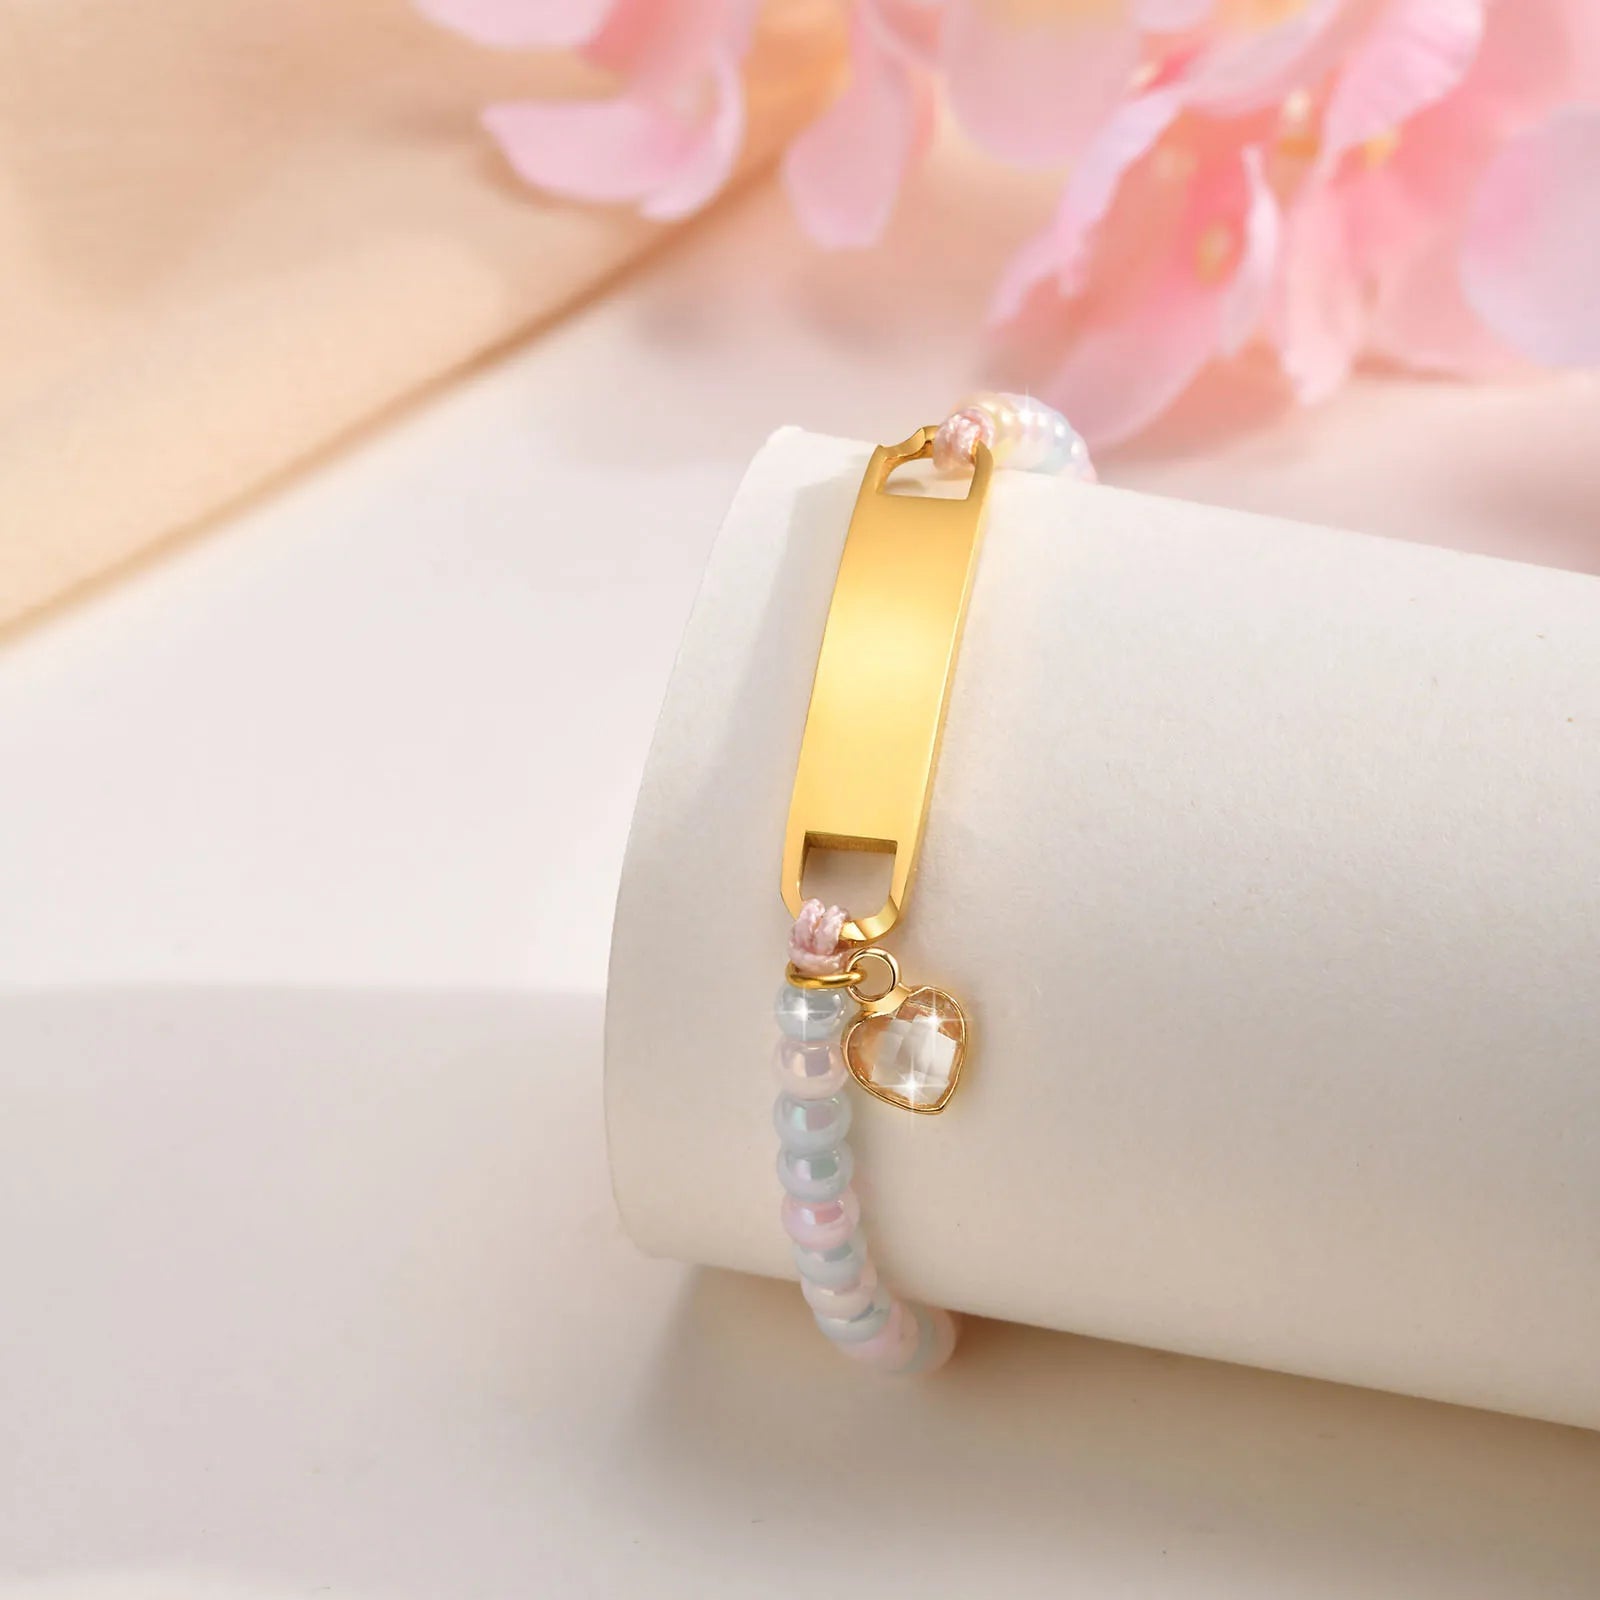 Personalized Beaded Cord Bracelet: A Meaningful Gift for Every Occasion!